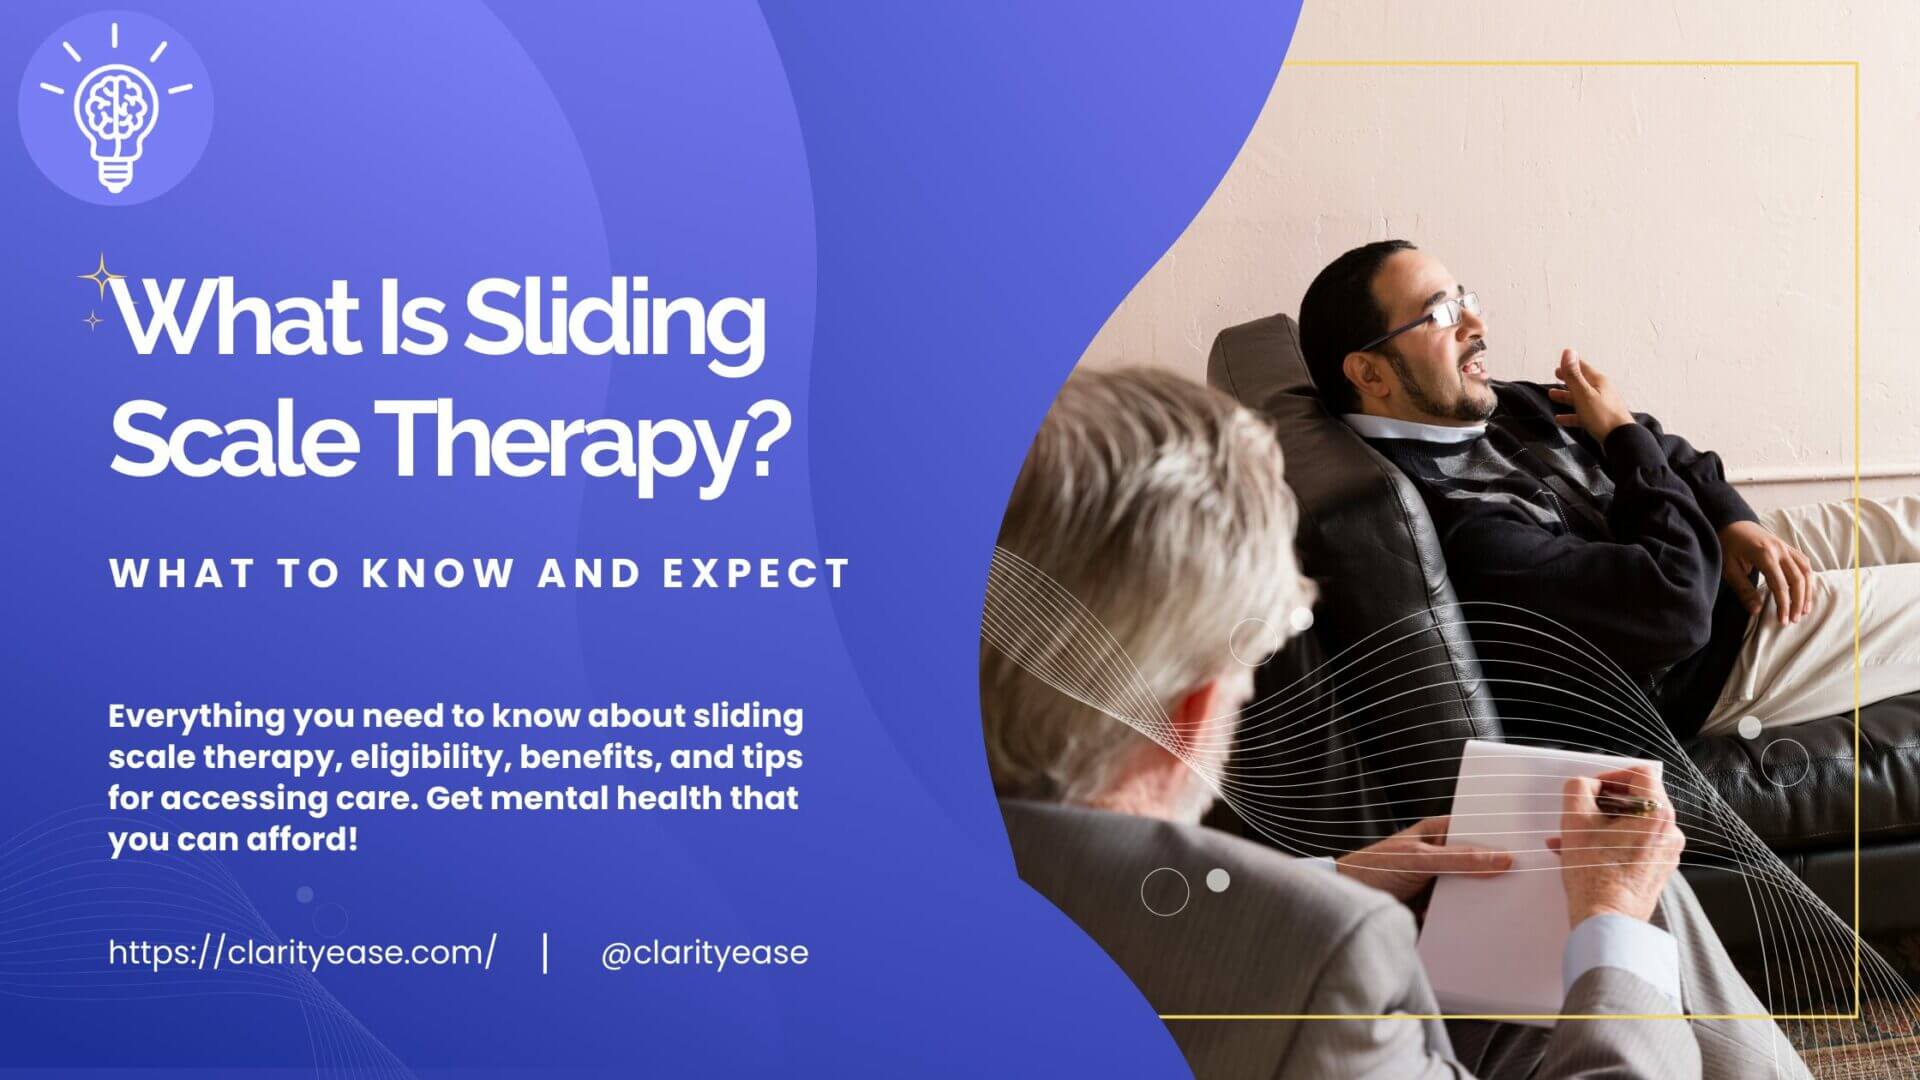 blog post banner what is sliding scale therapy? Person sitting in a chair getting the help from a therapist that is within their budget.